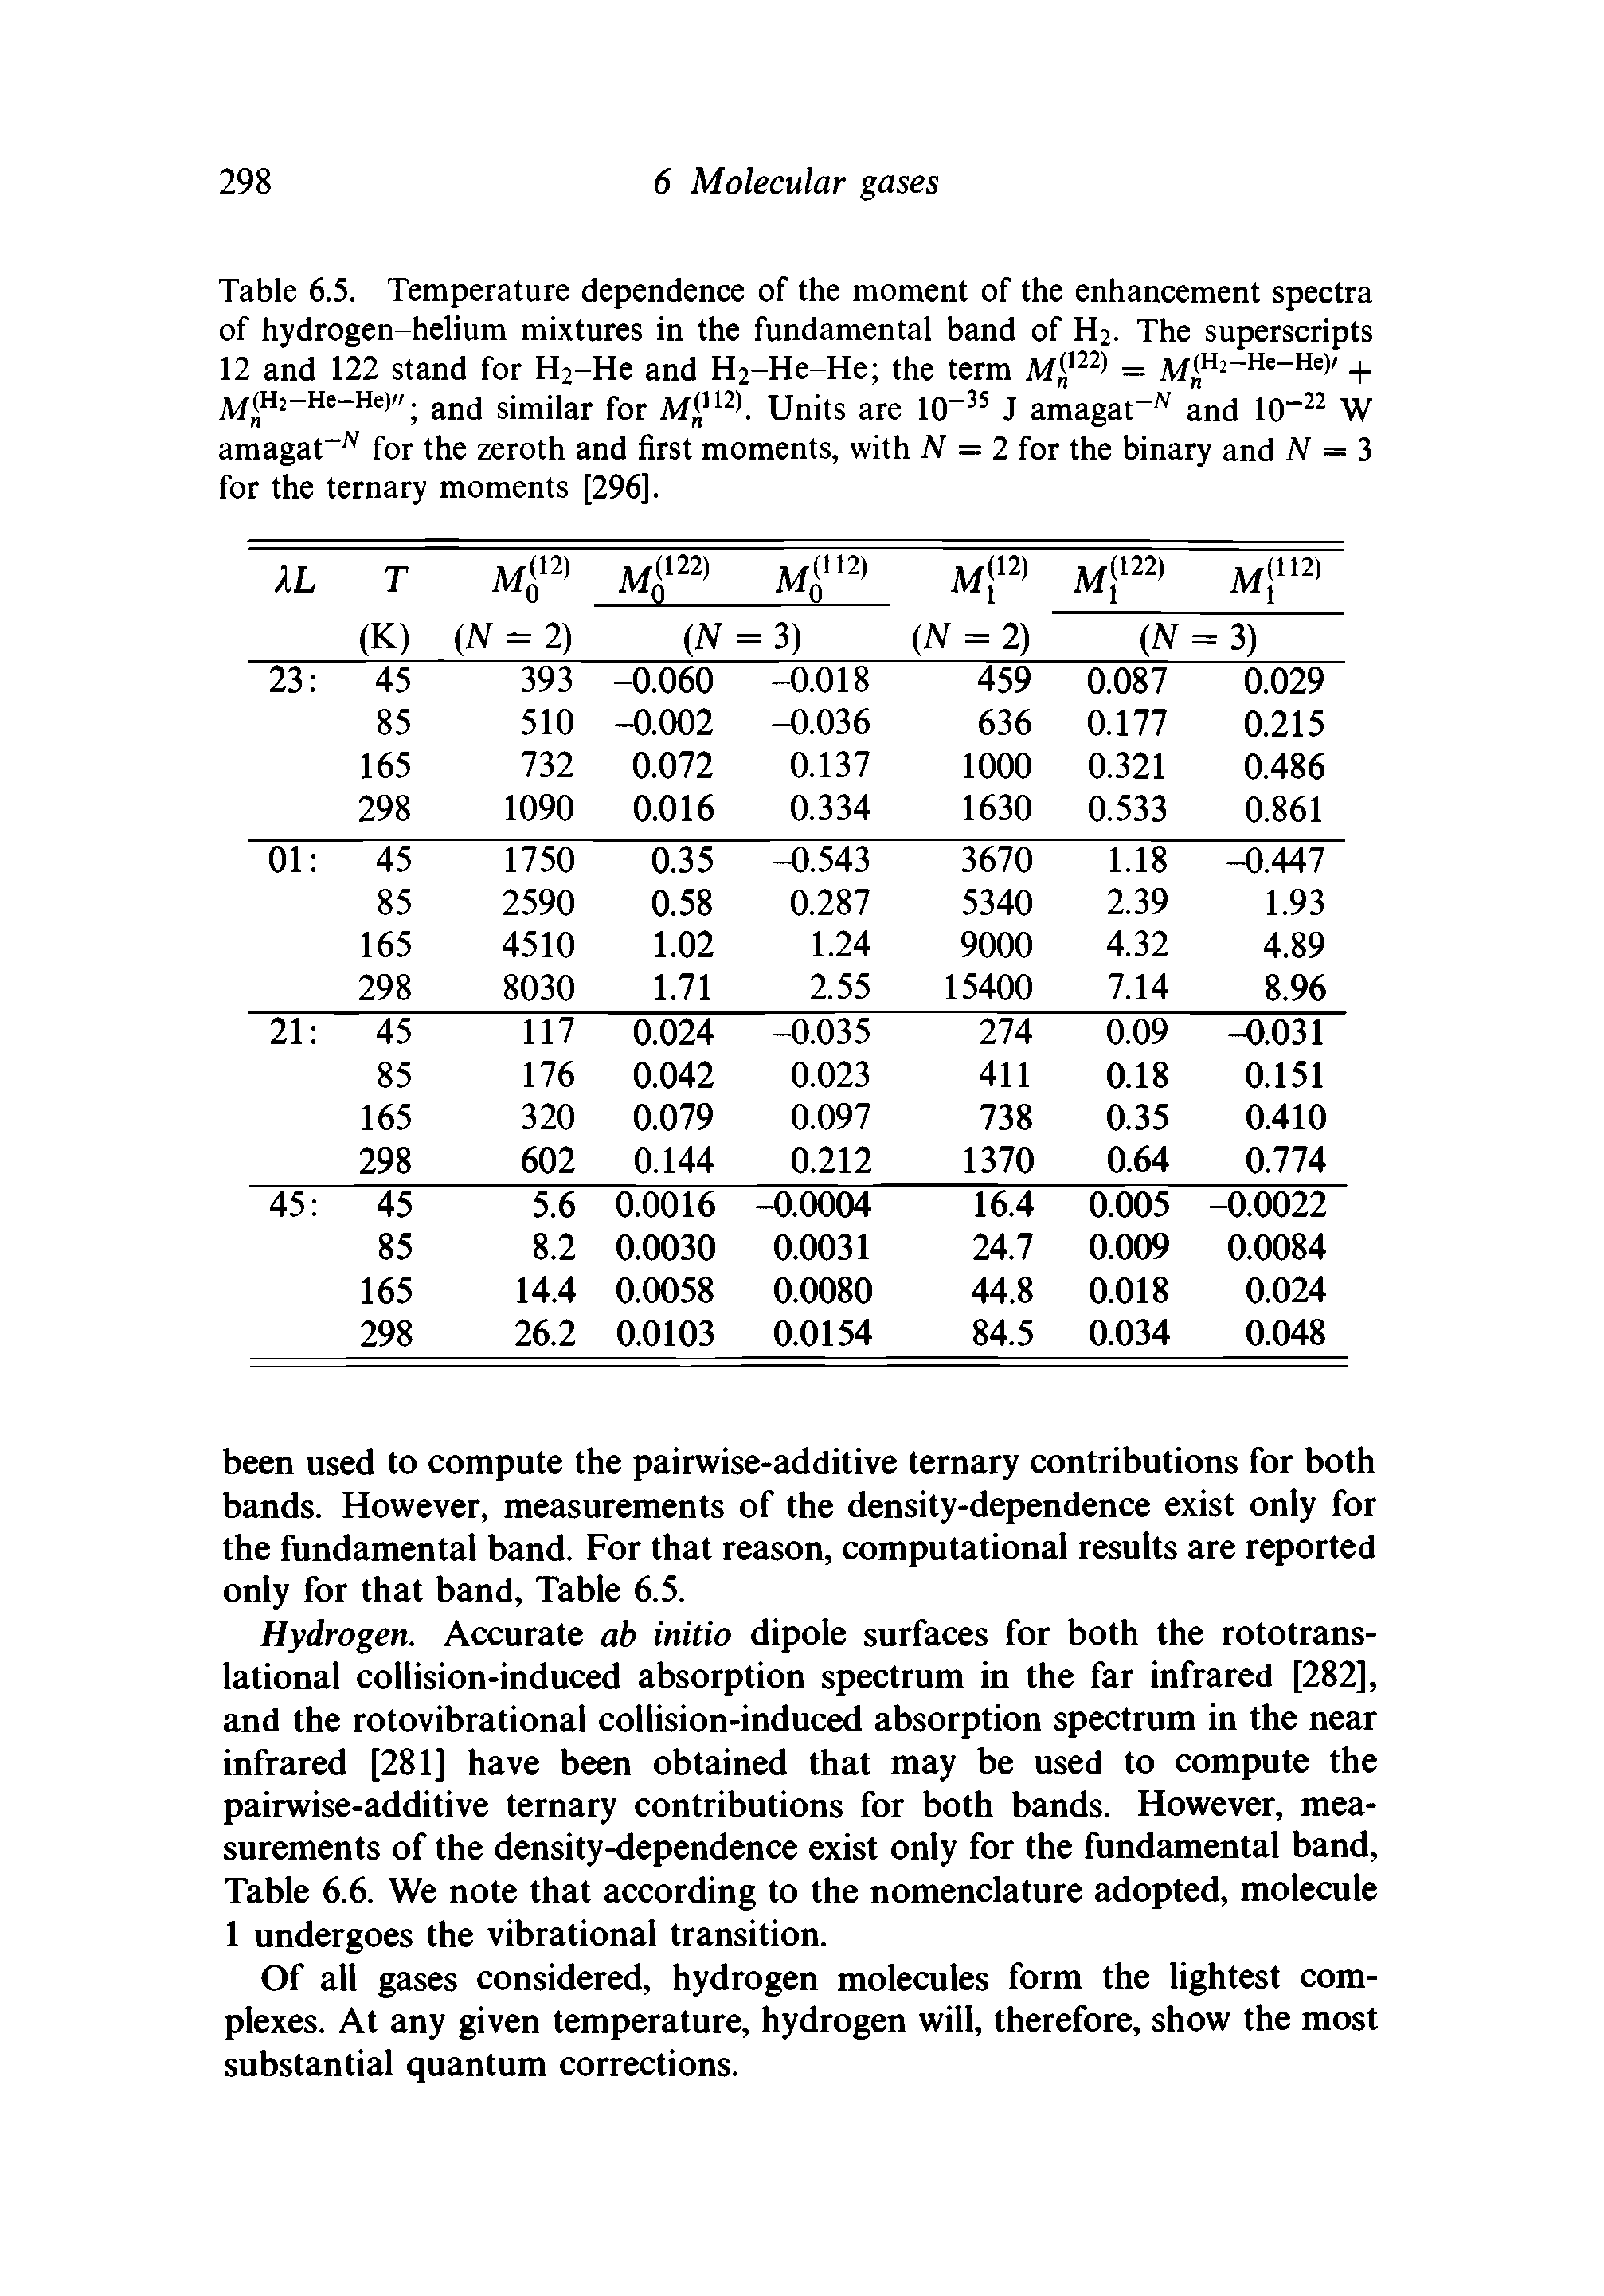 Table 6.5. Temperature dependence of the moment of the enhancement spectra of hydrogen-helium mixtures in the fundamental band of H2. The superscripts 12 and 122 stand for H2-He and H2-He-He the term M 122 = M H2 He H9 + M H2—He—He)//. ancj sjmjiar for M n Units are 10-35 J amagat N and 10-22 W amagat N for the zeroth and first moments, with JV = 2 for the binary and N = 3 for the ternary moments [296].